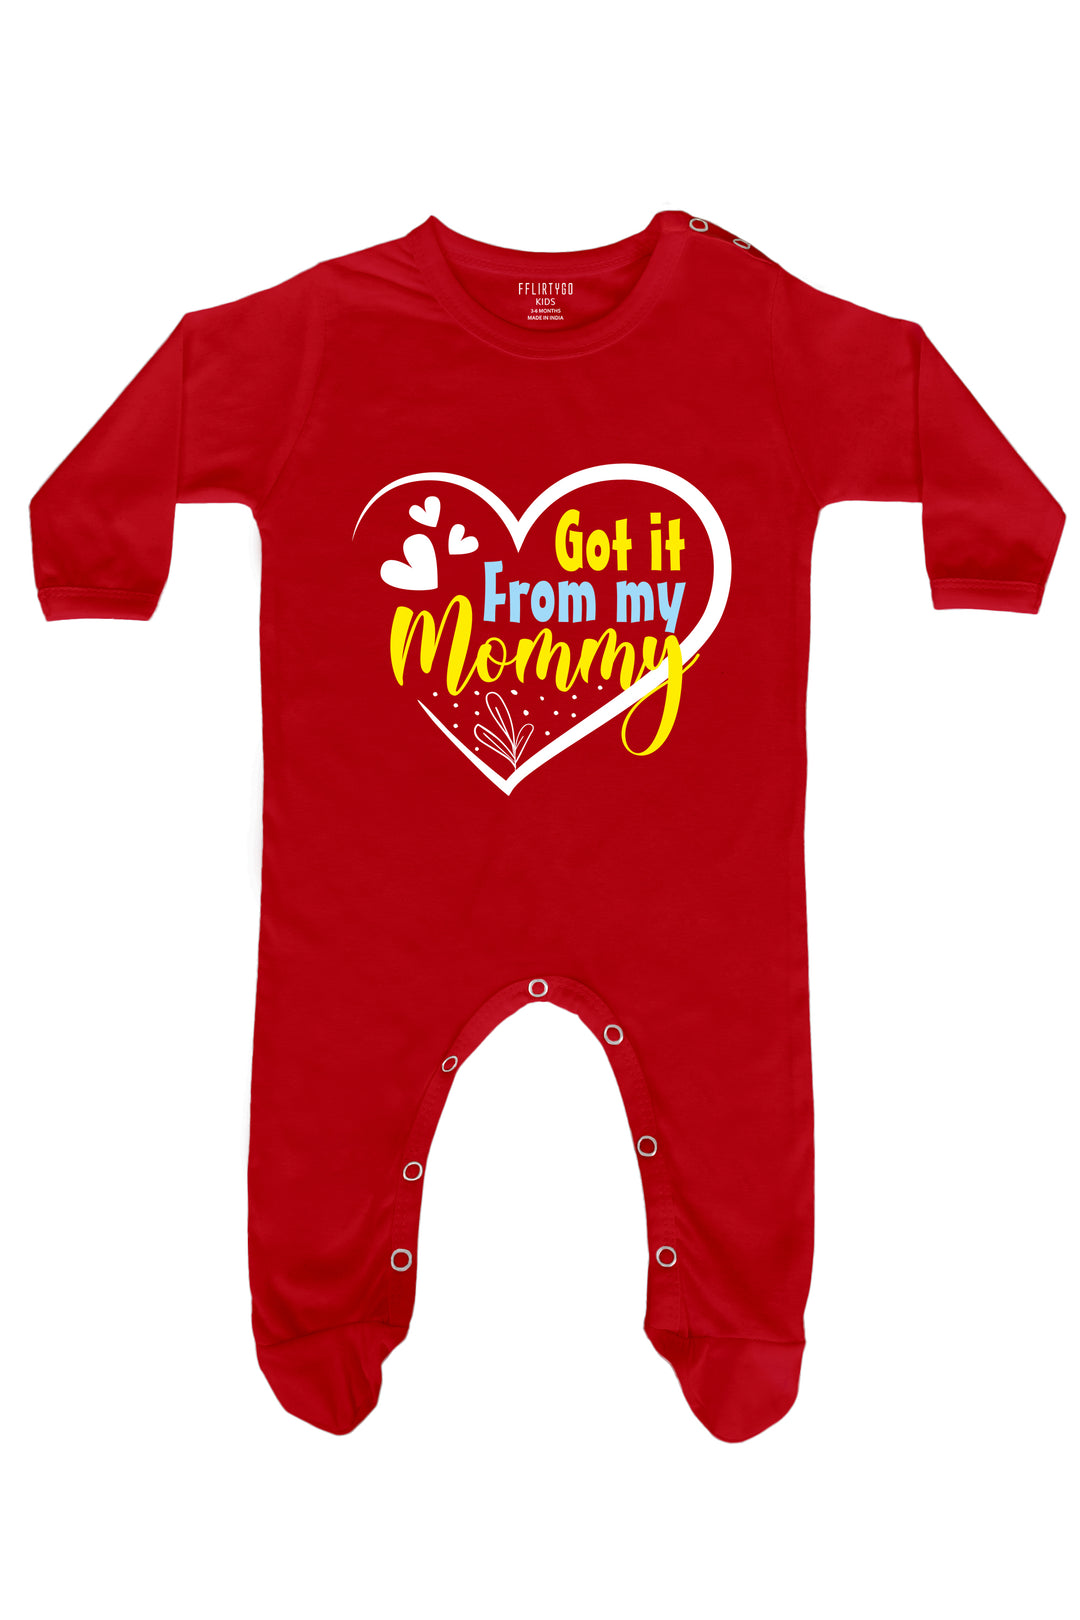 Got It From Mommy Baby Romper | Onesies